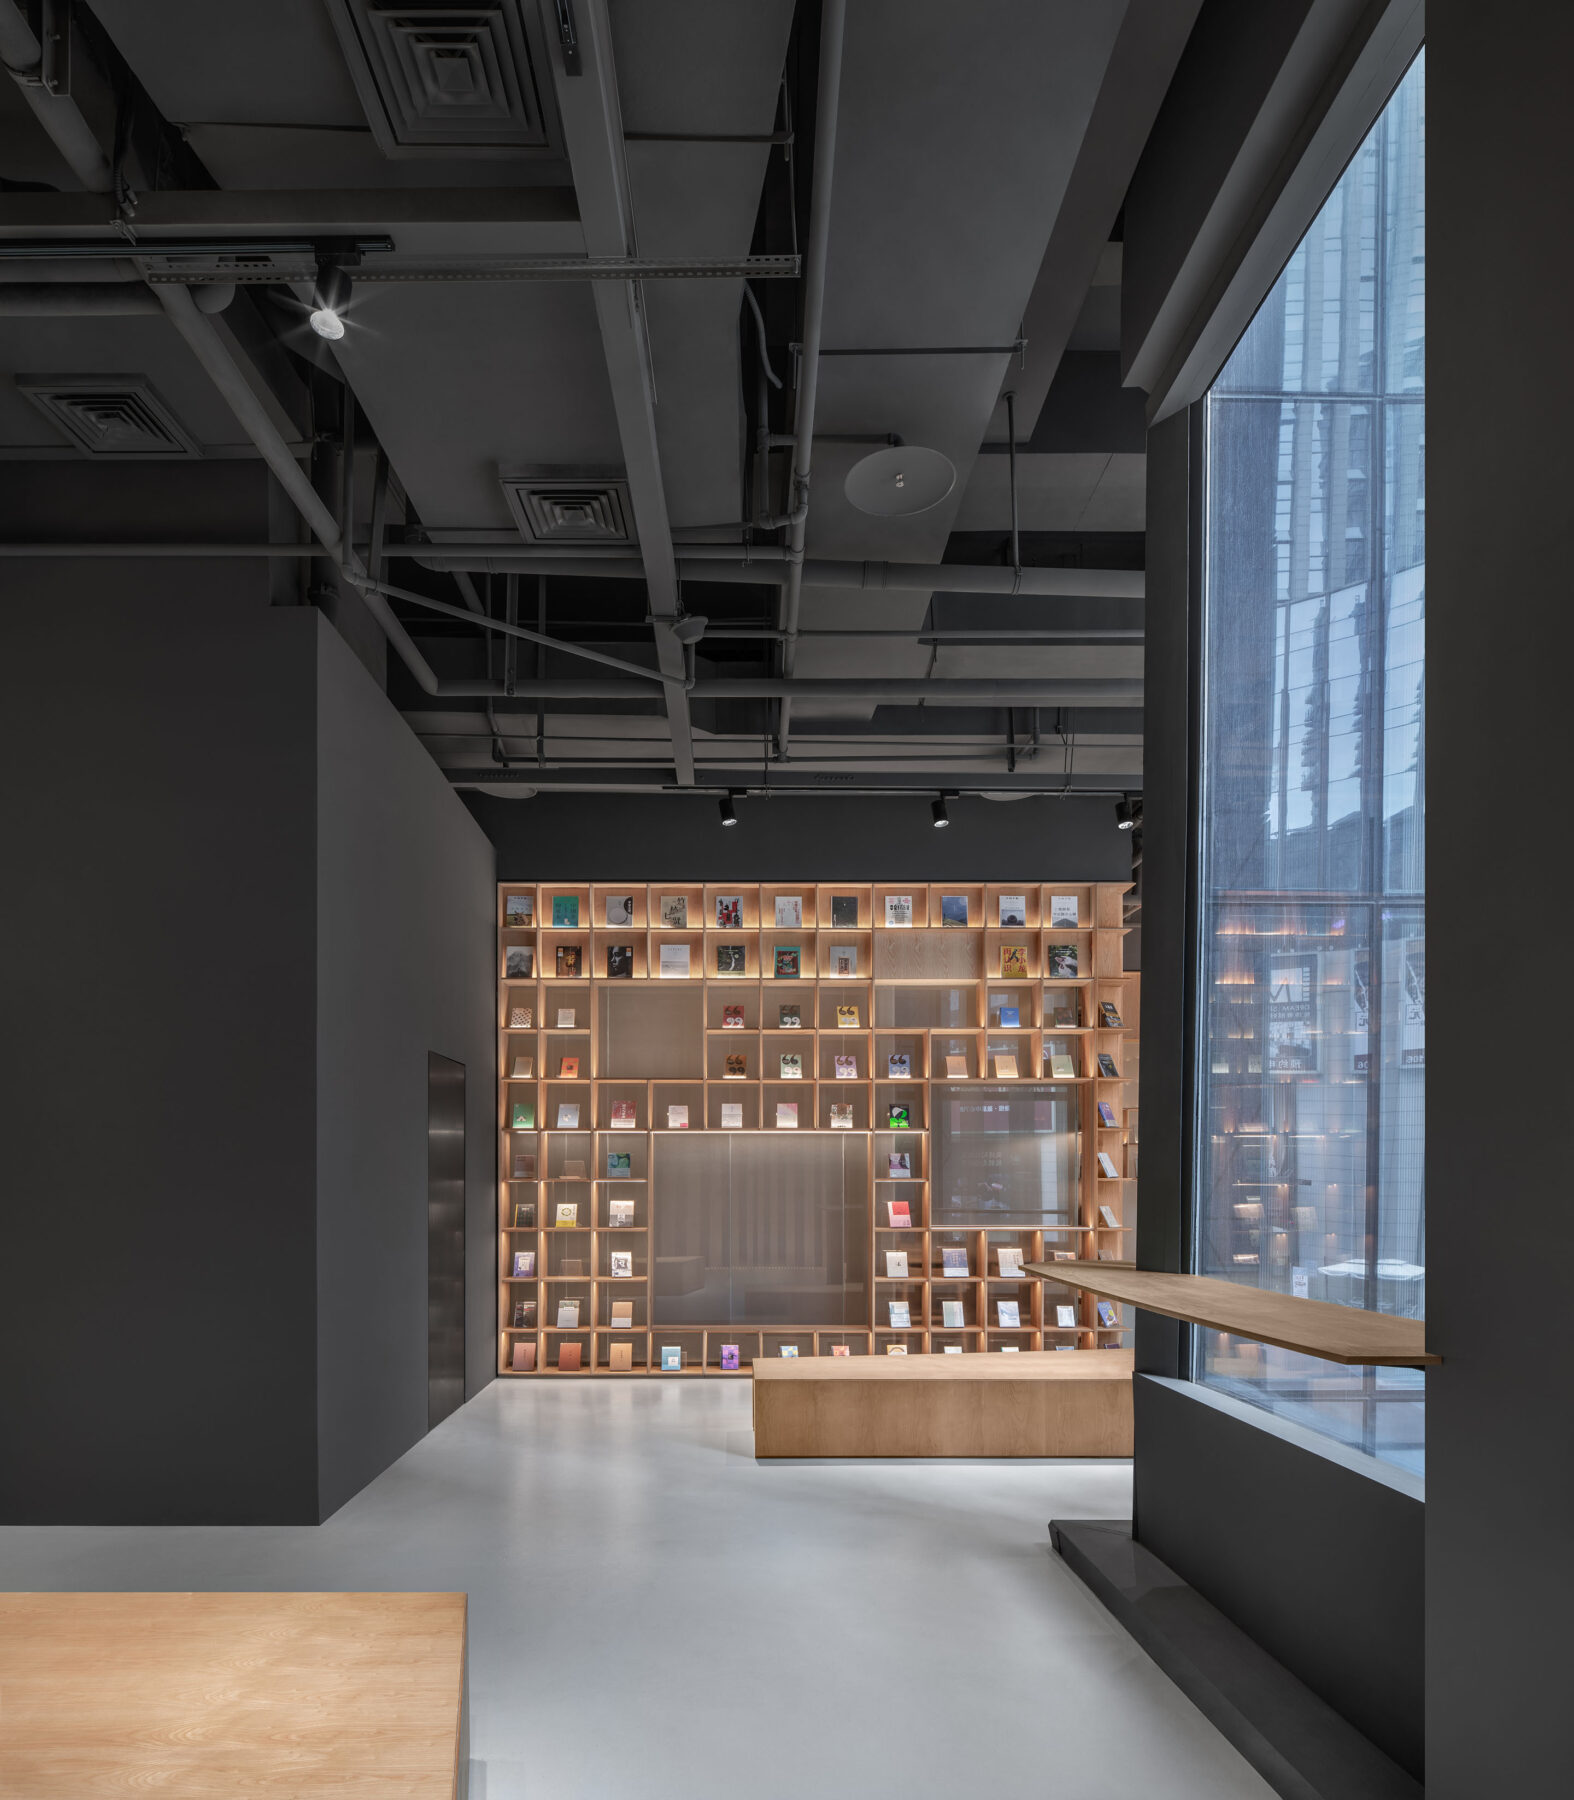 Archisearch The Glade Bookstore in Chongqing, China | HAS design and research